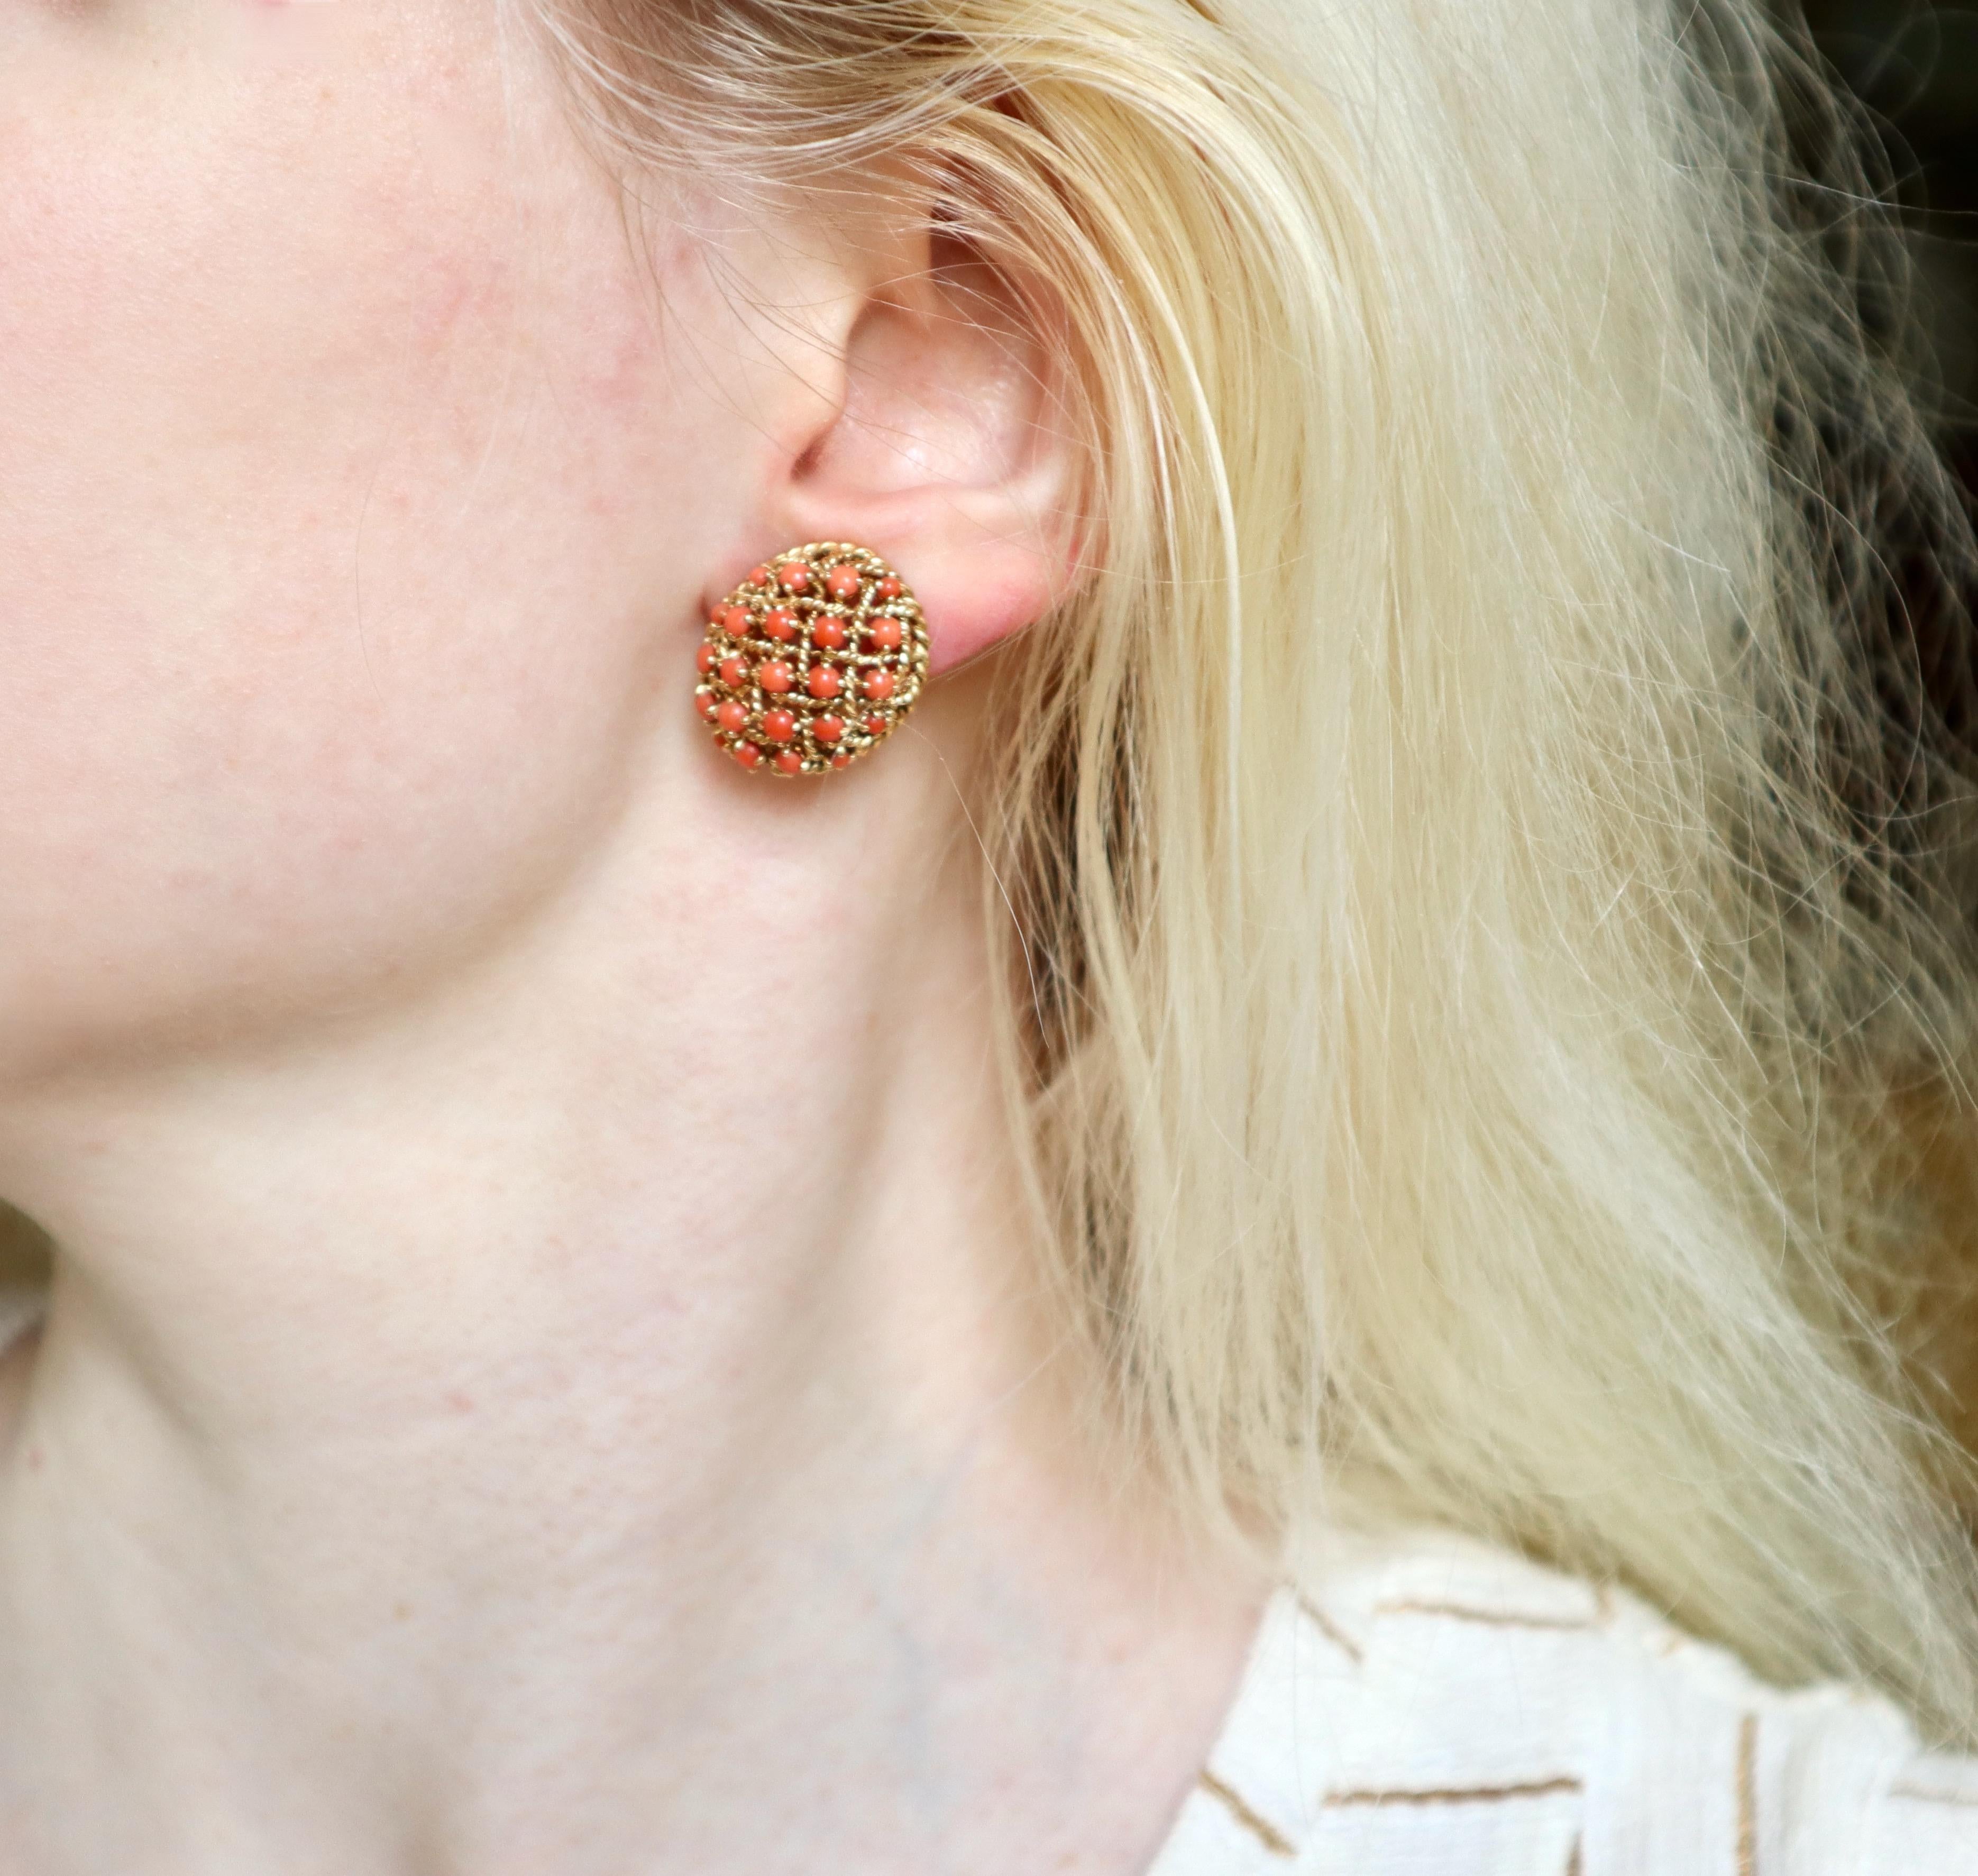 CARTIER oval Clip Earrings 18 Carat yellow Gold and Coral.
Fishnet formed of twisted gold wires crimping Cabochon Corals in their Mesh.
Numbered and Signed Cartier Paris
Eagle head hallmark. French work from the 1960's
Weight: 16,7g
Dimensions: